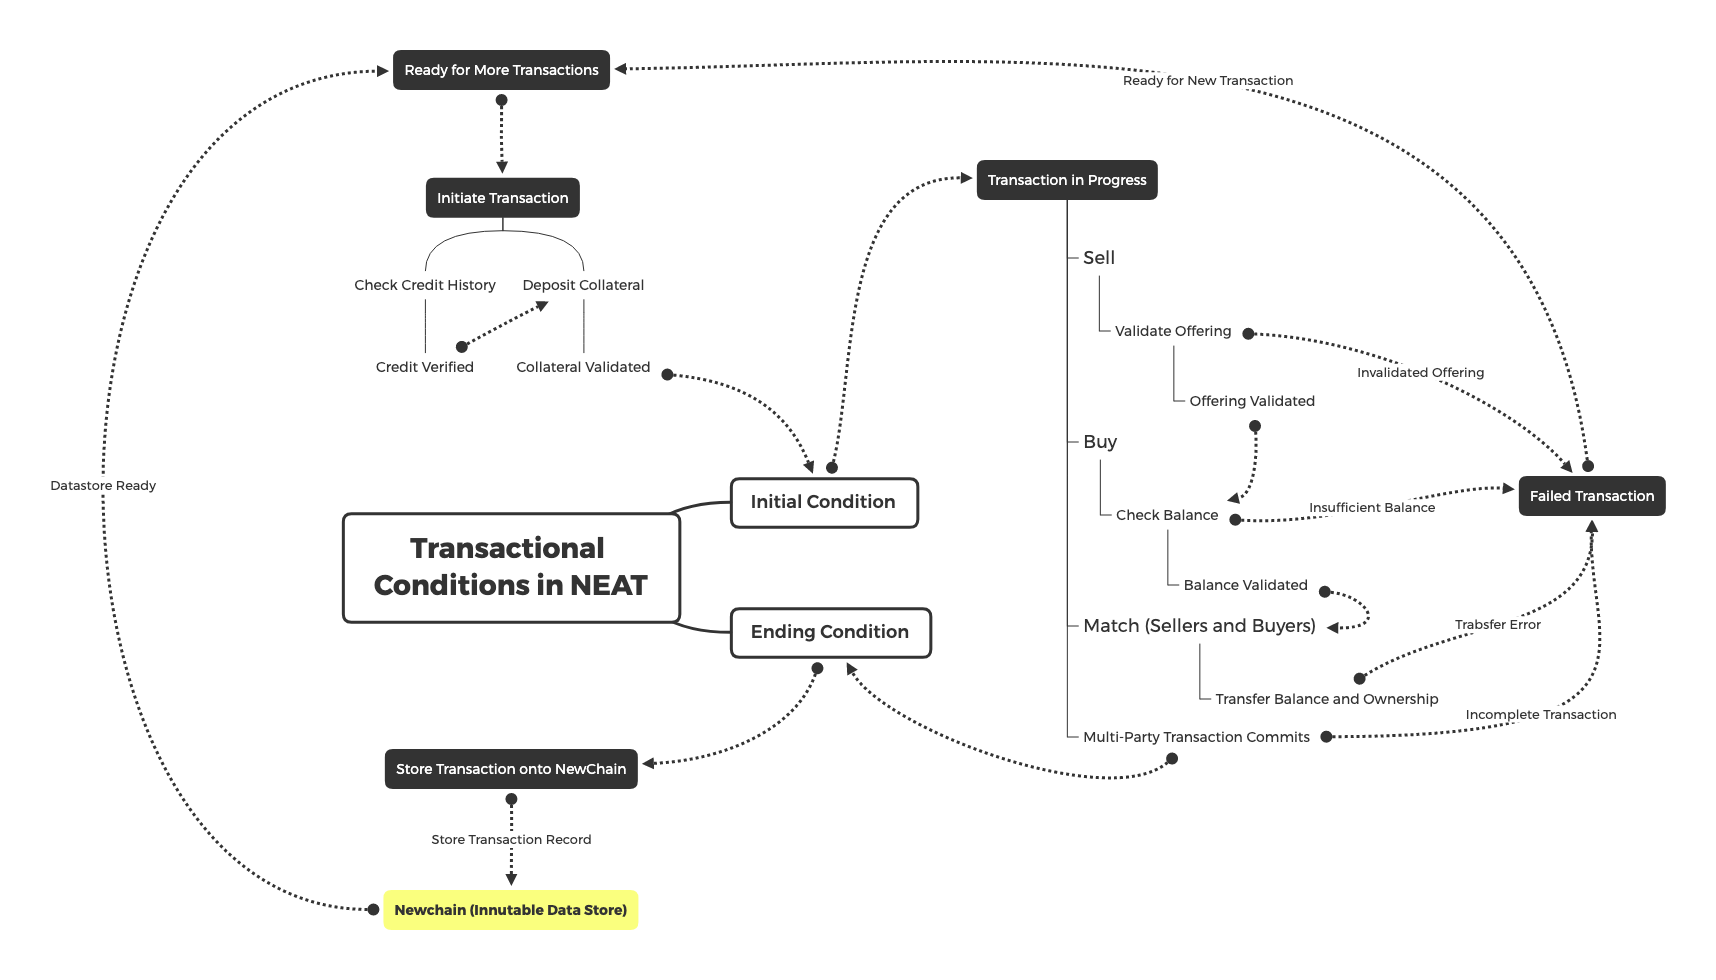 A State Transition diagram of NEAT Transaction